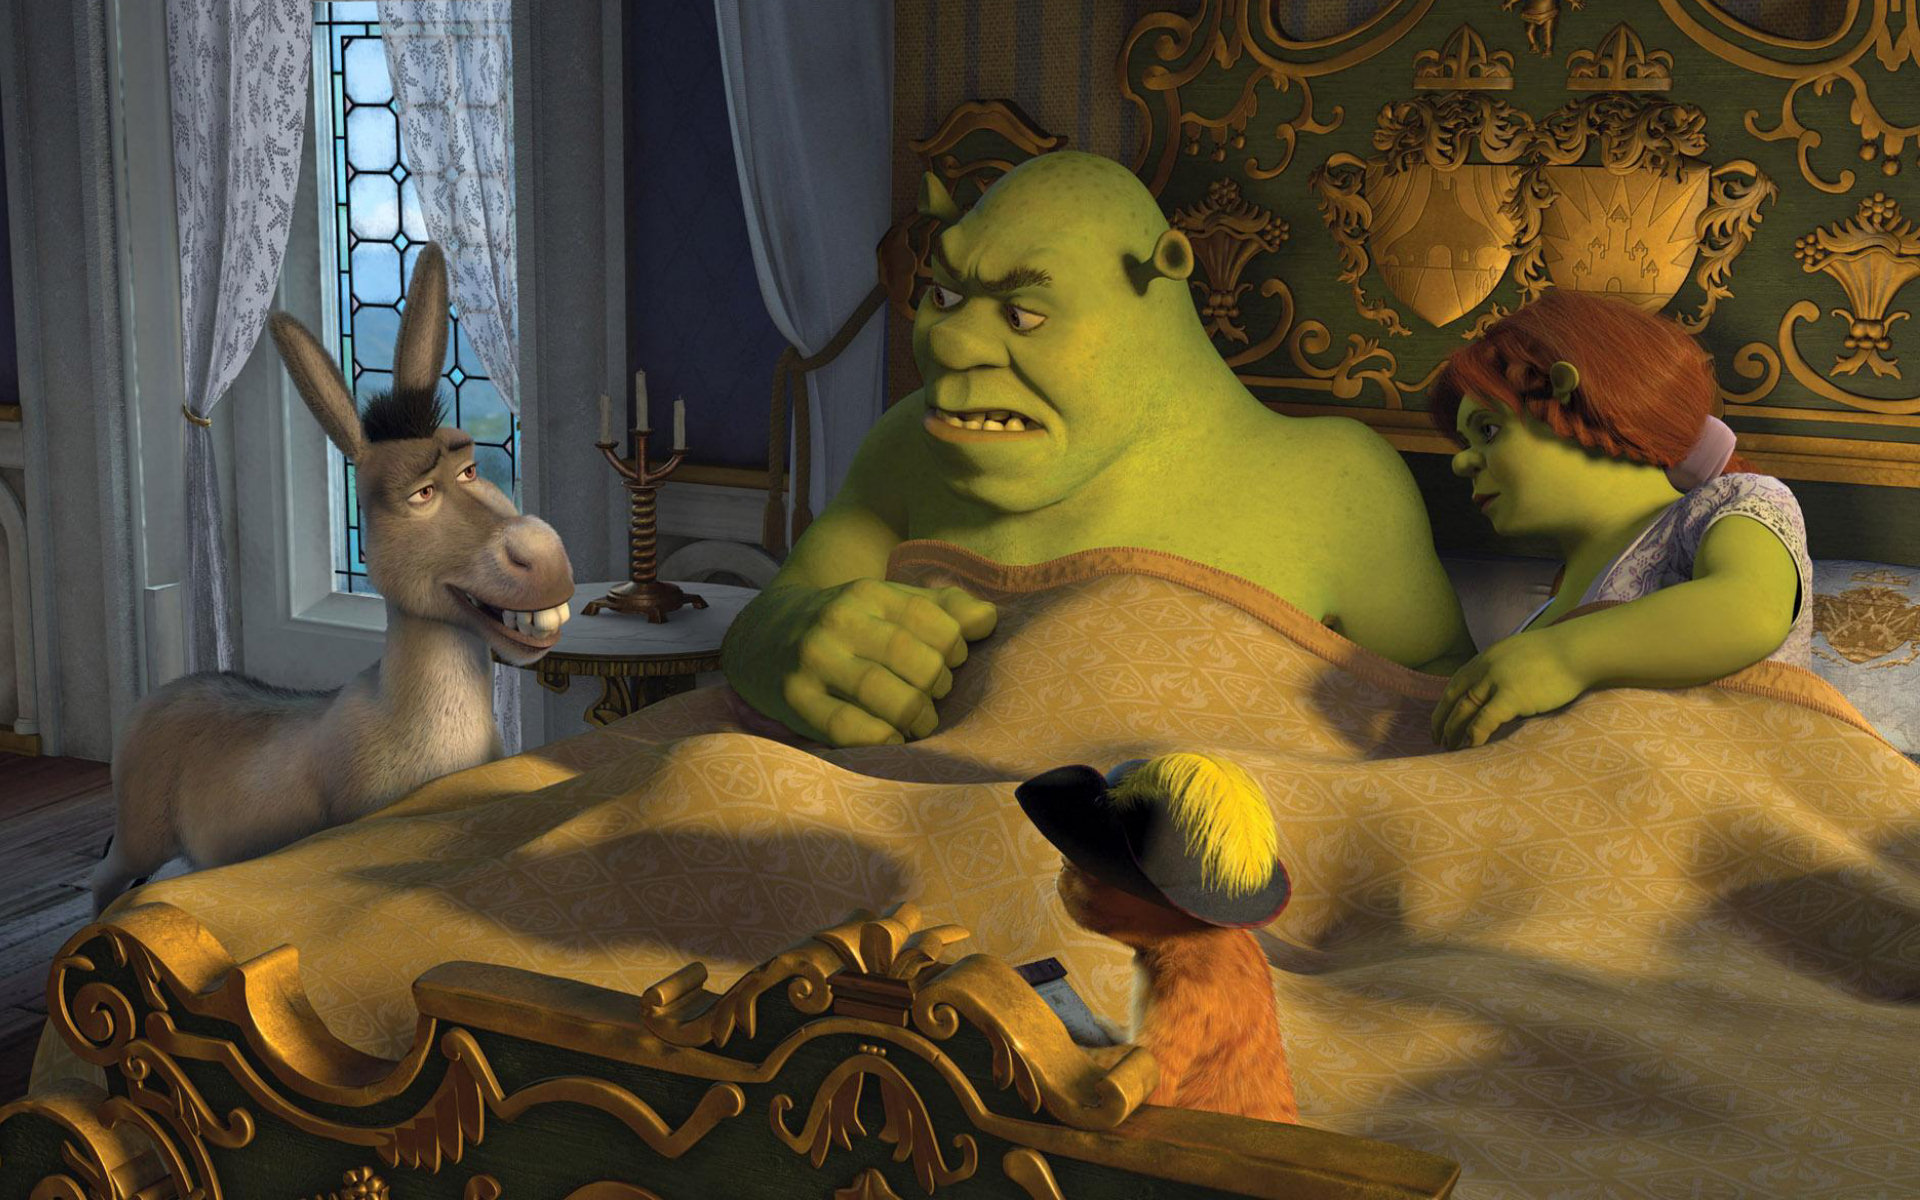 A cartoon character is laying in bed with two other characters - Shrek